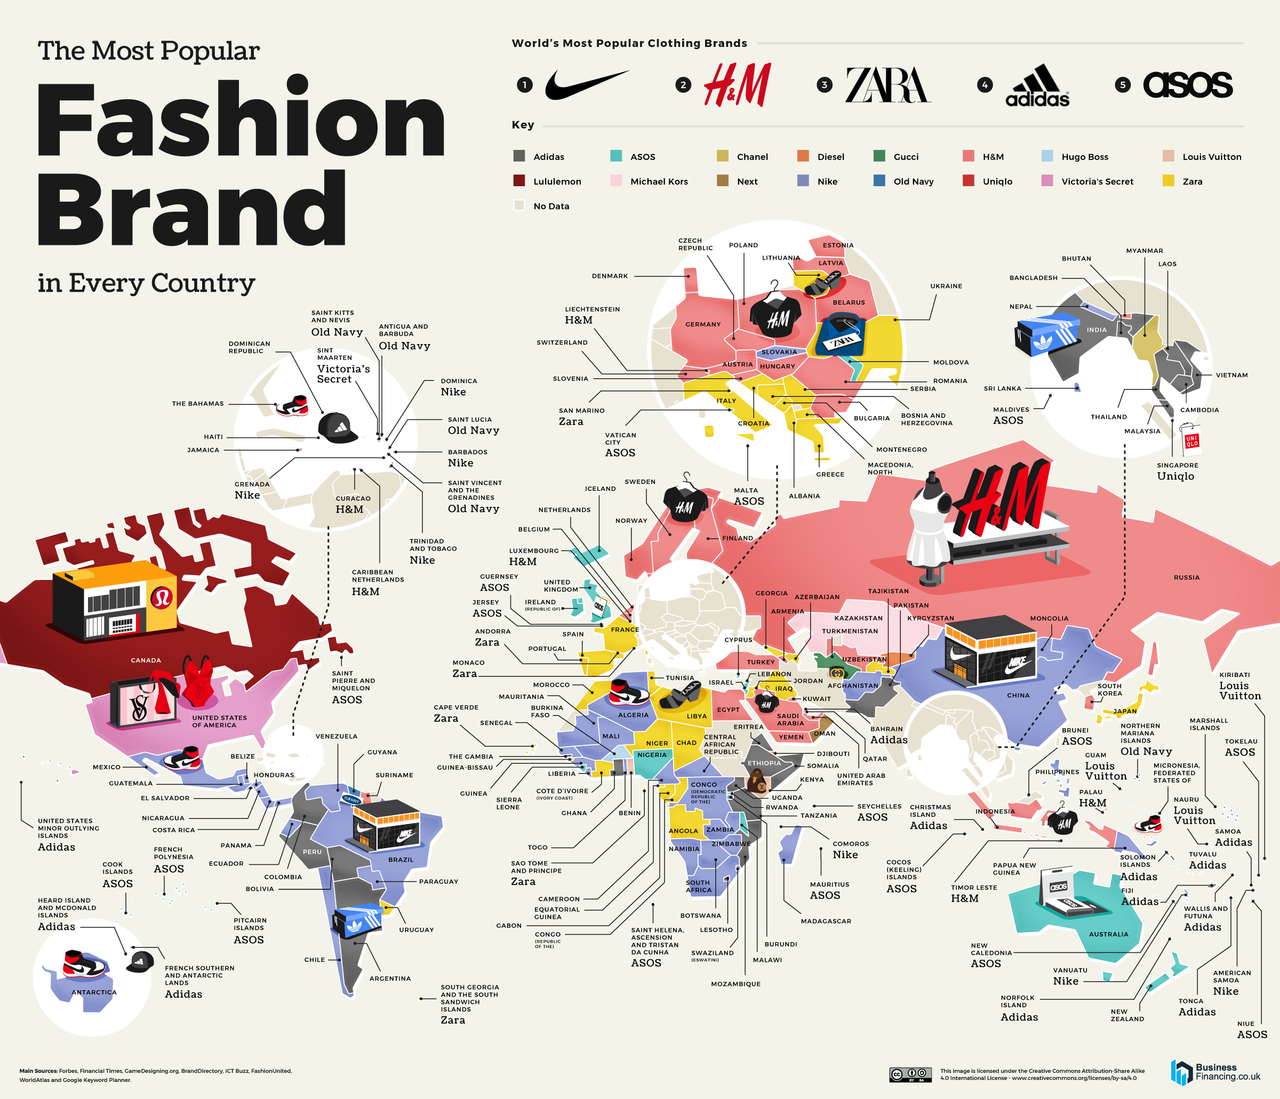 08_Most-Popular-Consumer-Brand-in-Every-Country_Fashion.png